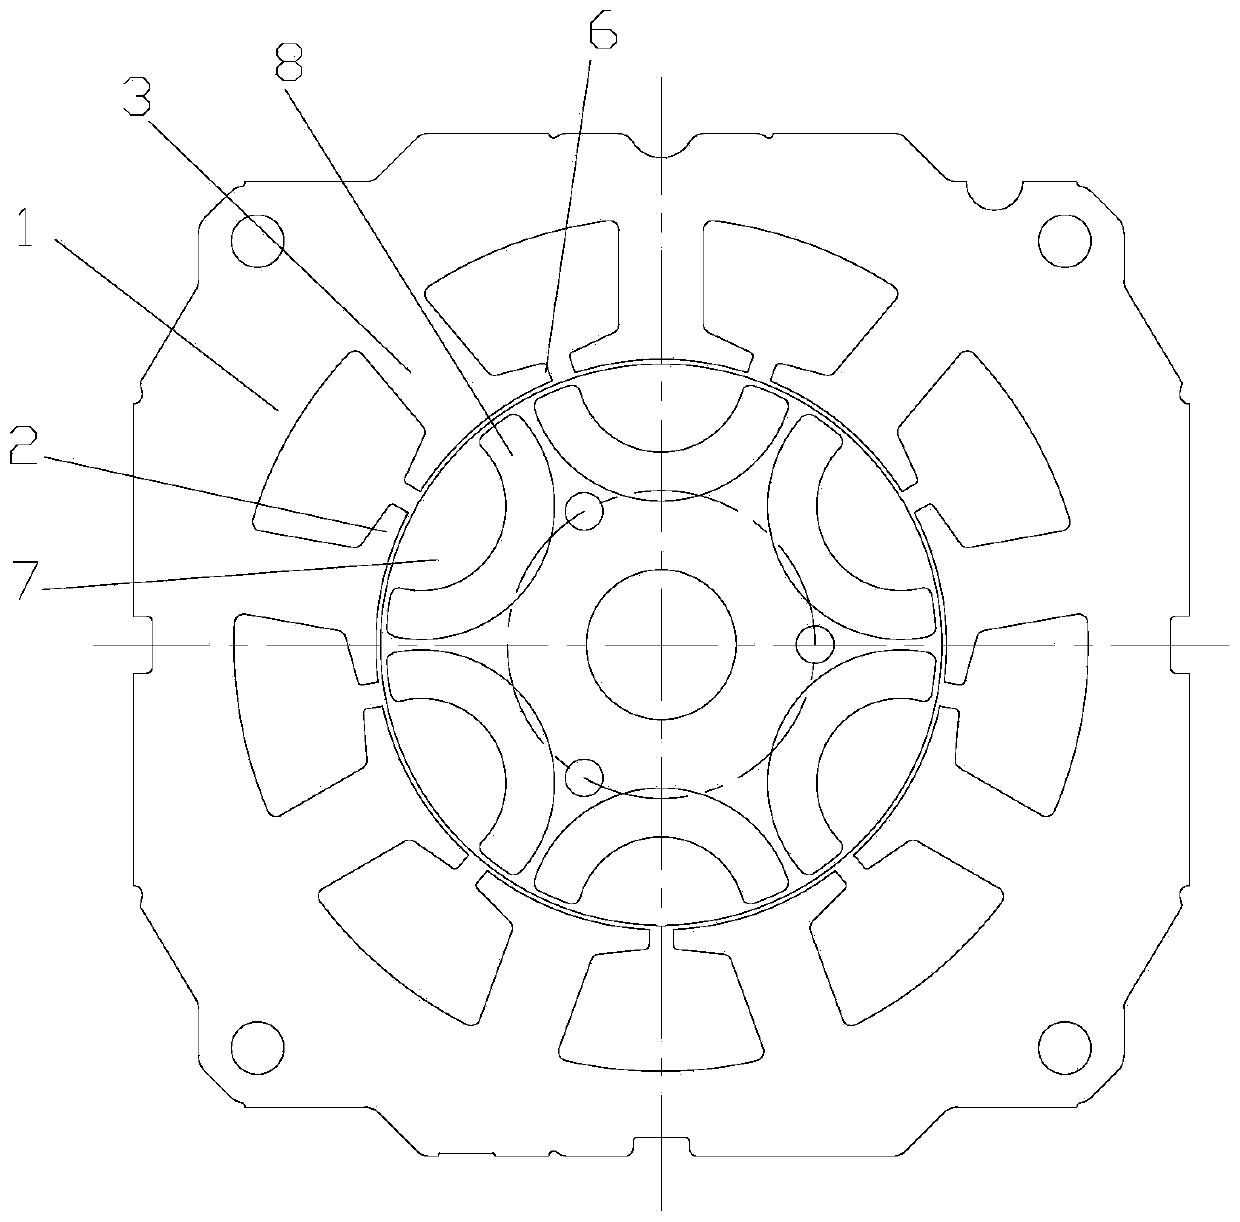 Motor stator, pole shoe processing method thereof and permanent magnet motor